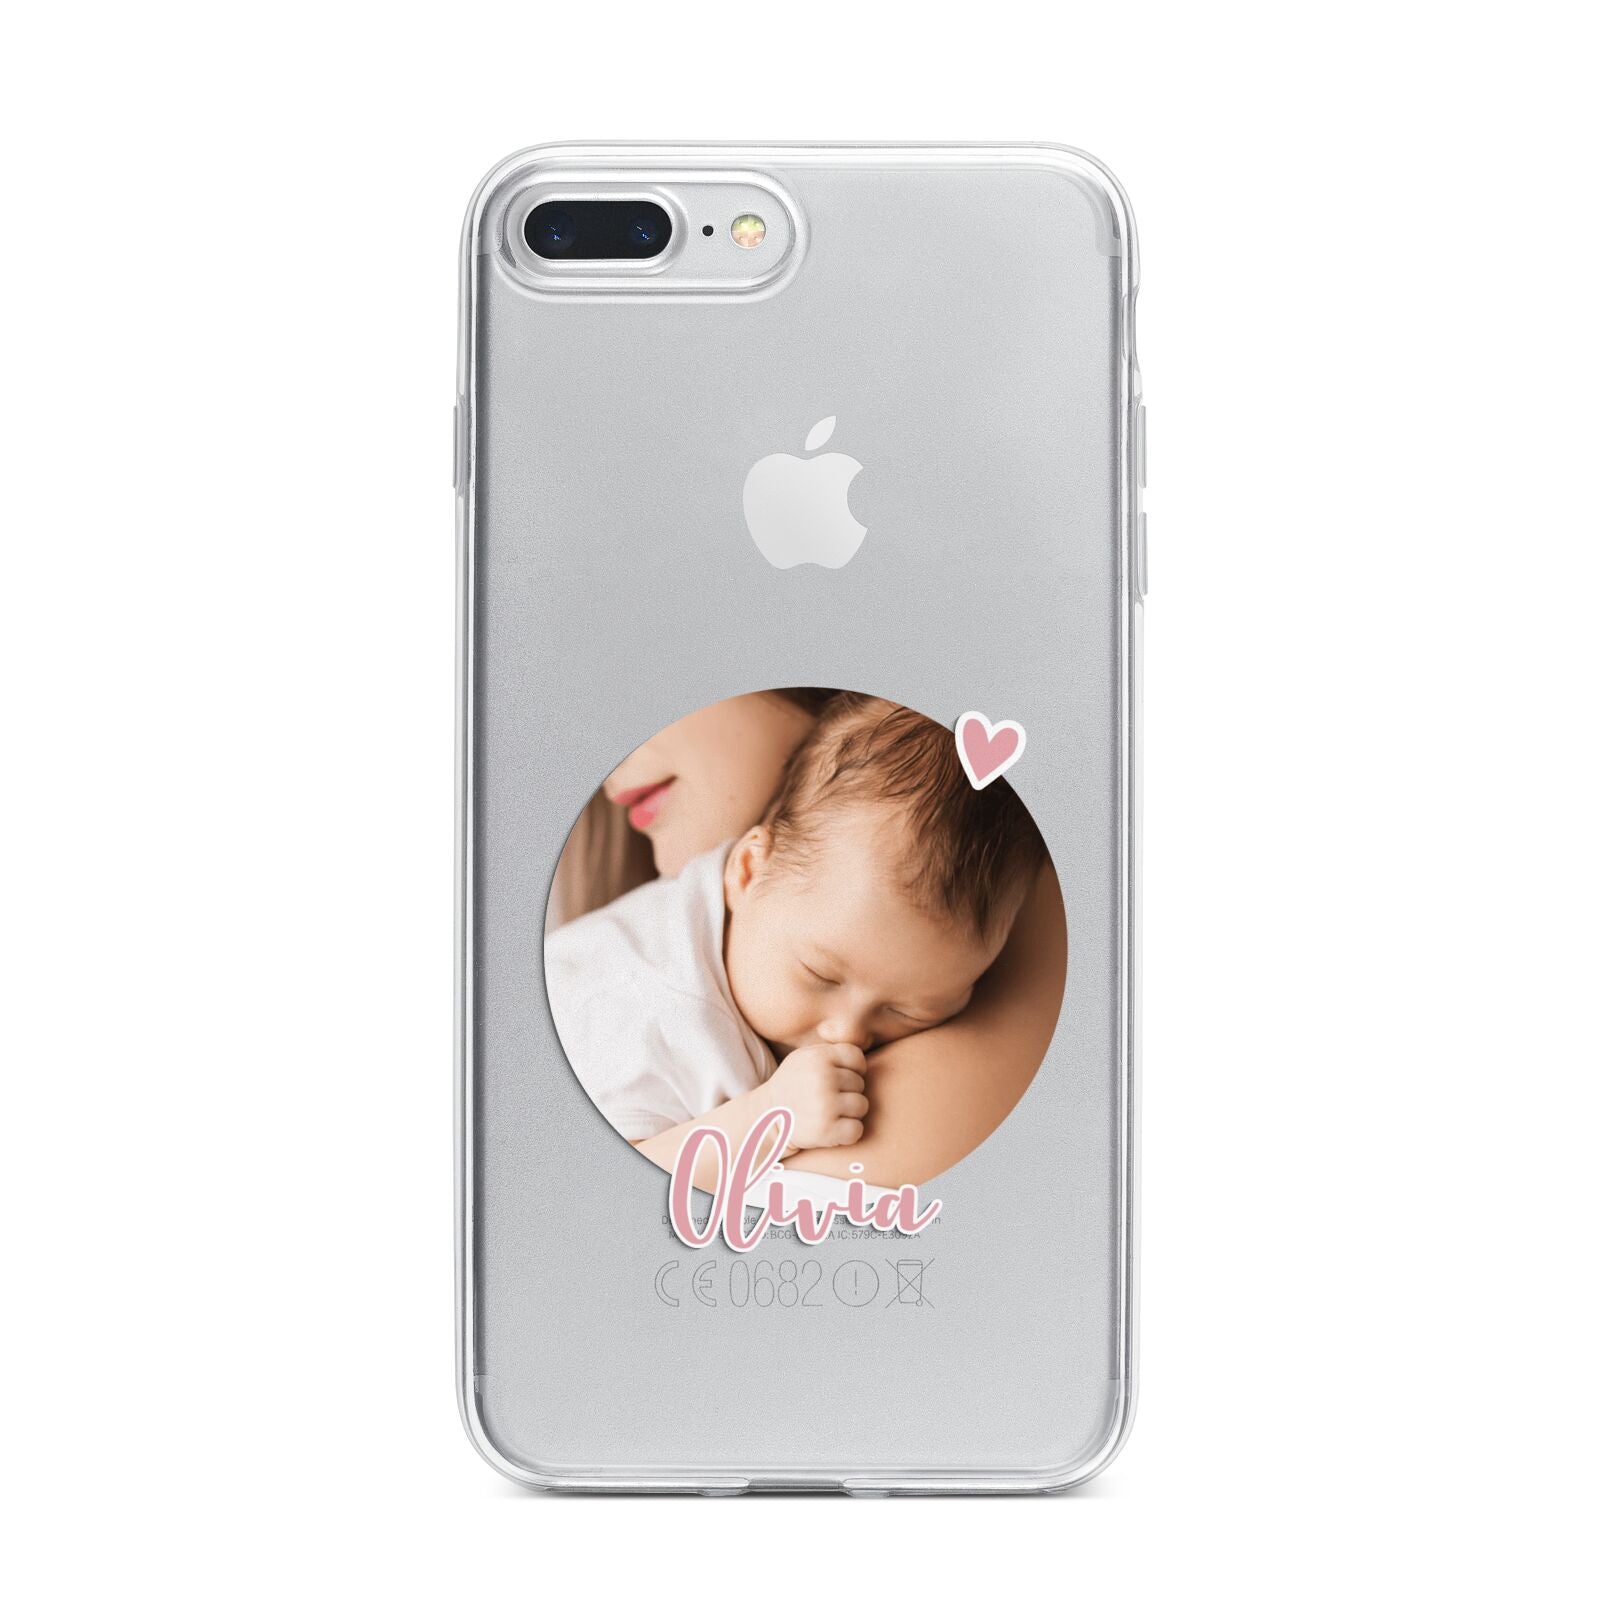 Round Photo Love Upload iPhone 7 Plus Bumper Case on Silver iPhone